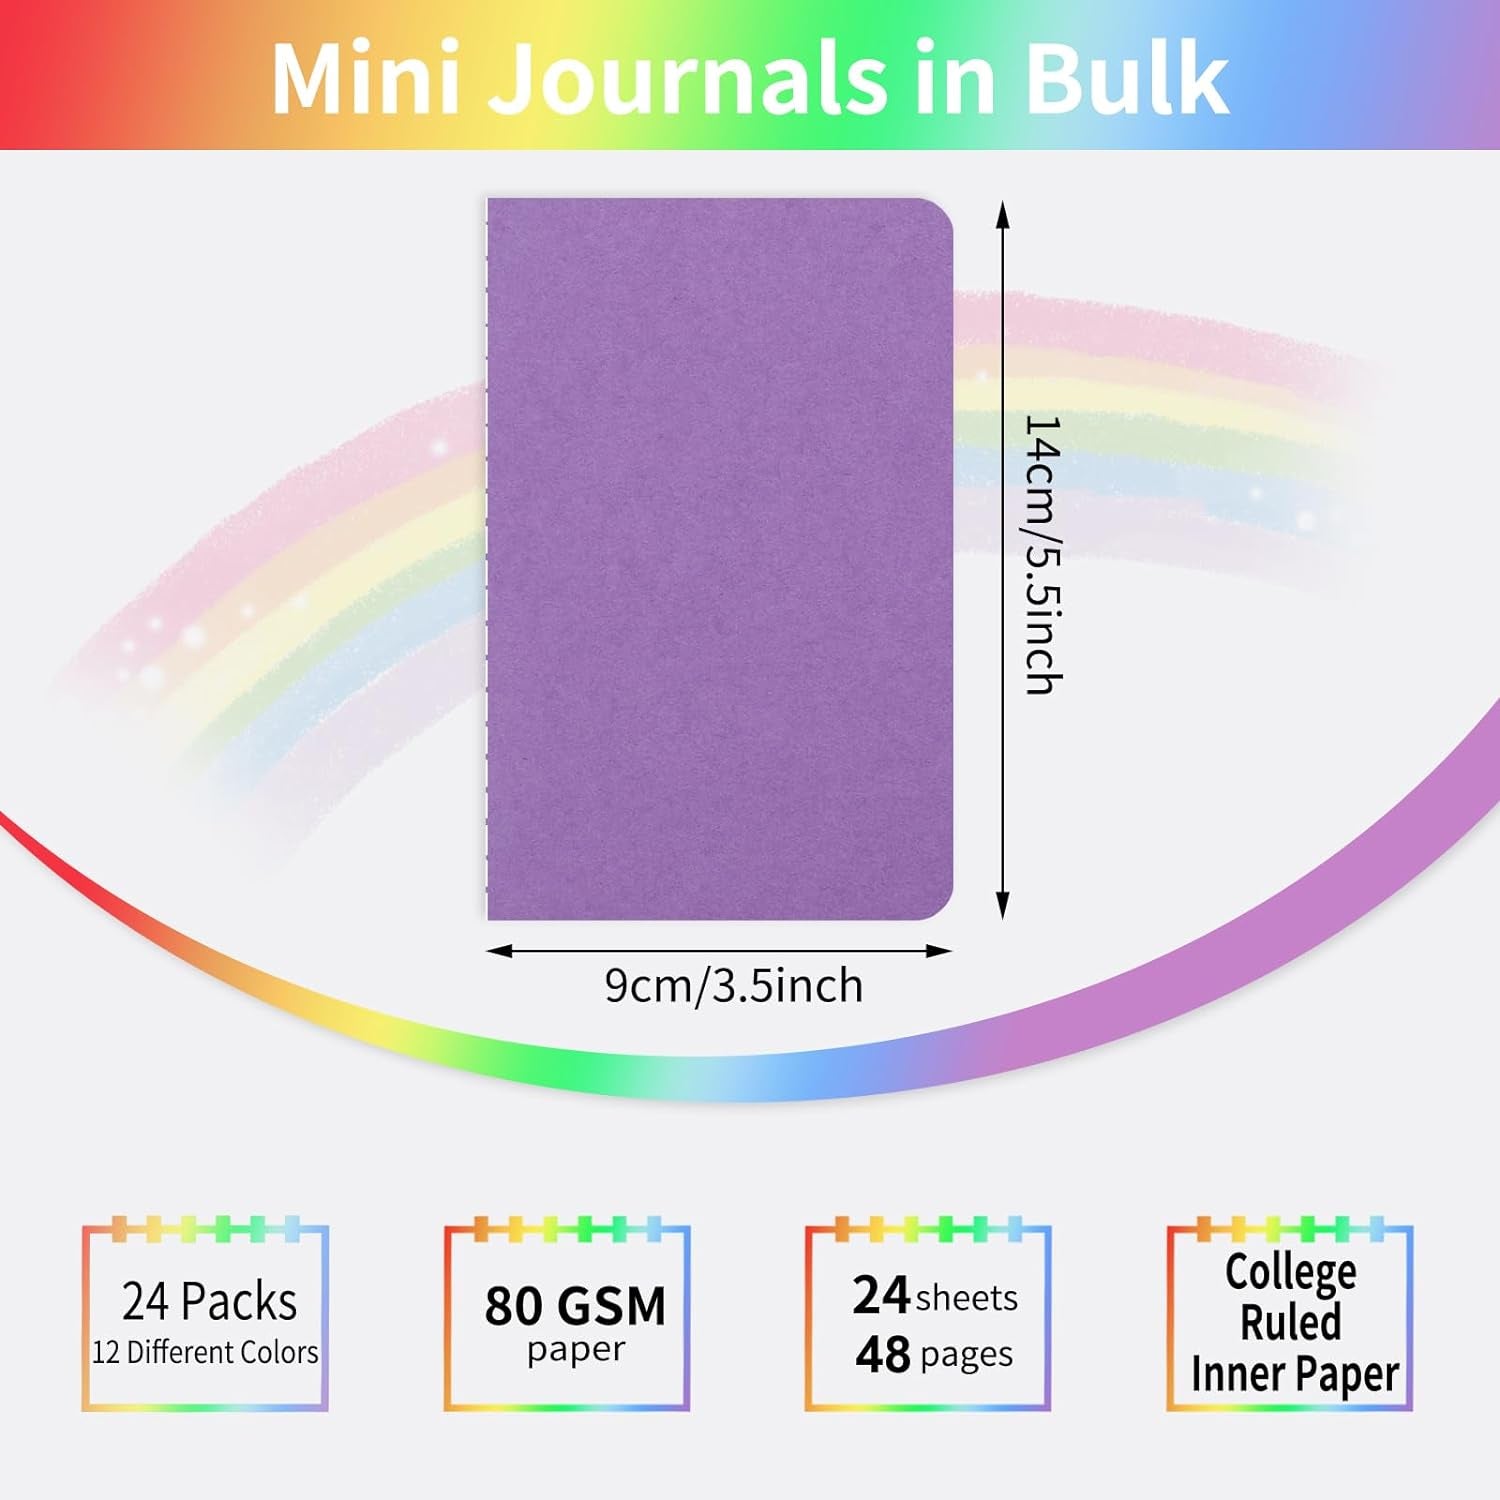 Blank Notebook, Mini Coloring Book, 16 Pack, 4.25X5.5 Inches, A6 Colorful, Blank Books for Kids, Notebooks for Journaling and Sketching, 16 Assorted Bright Colors Small Pocket Notebooks